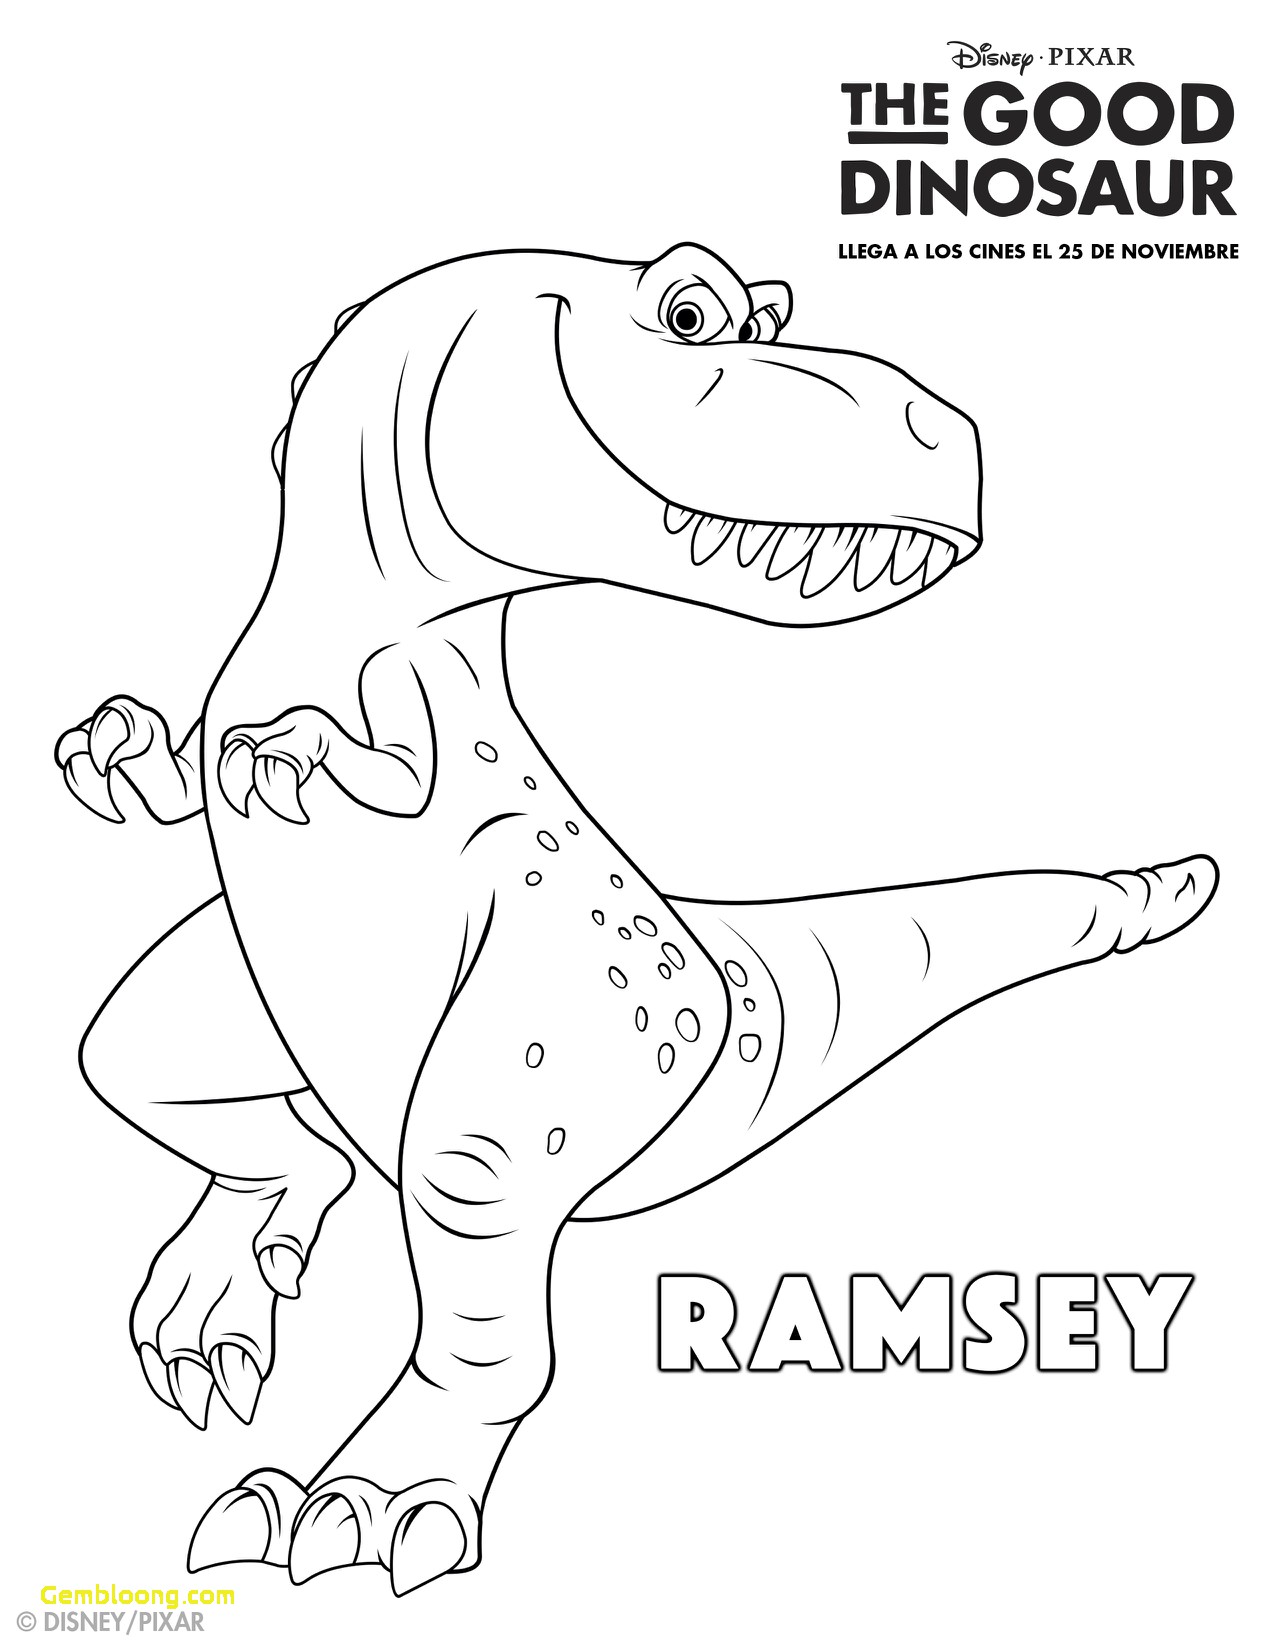 The Good Dinosaur Coloring Pages Ramsey coloring pages